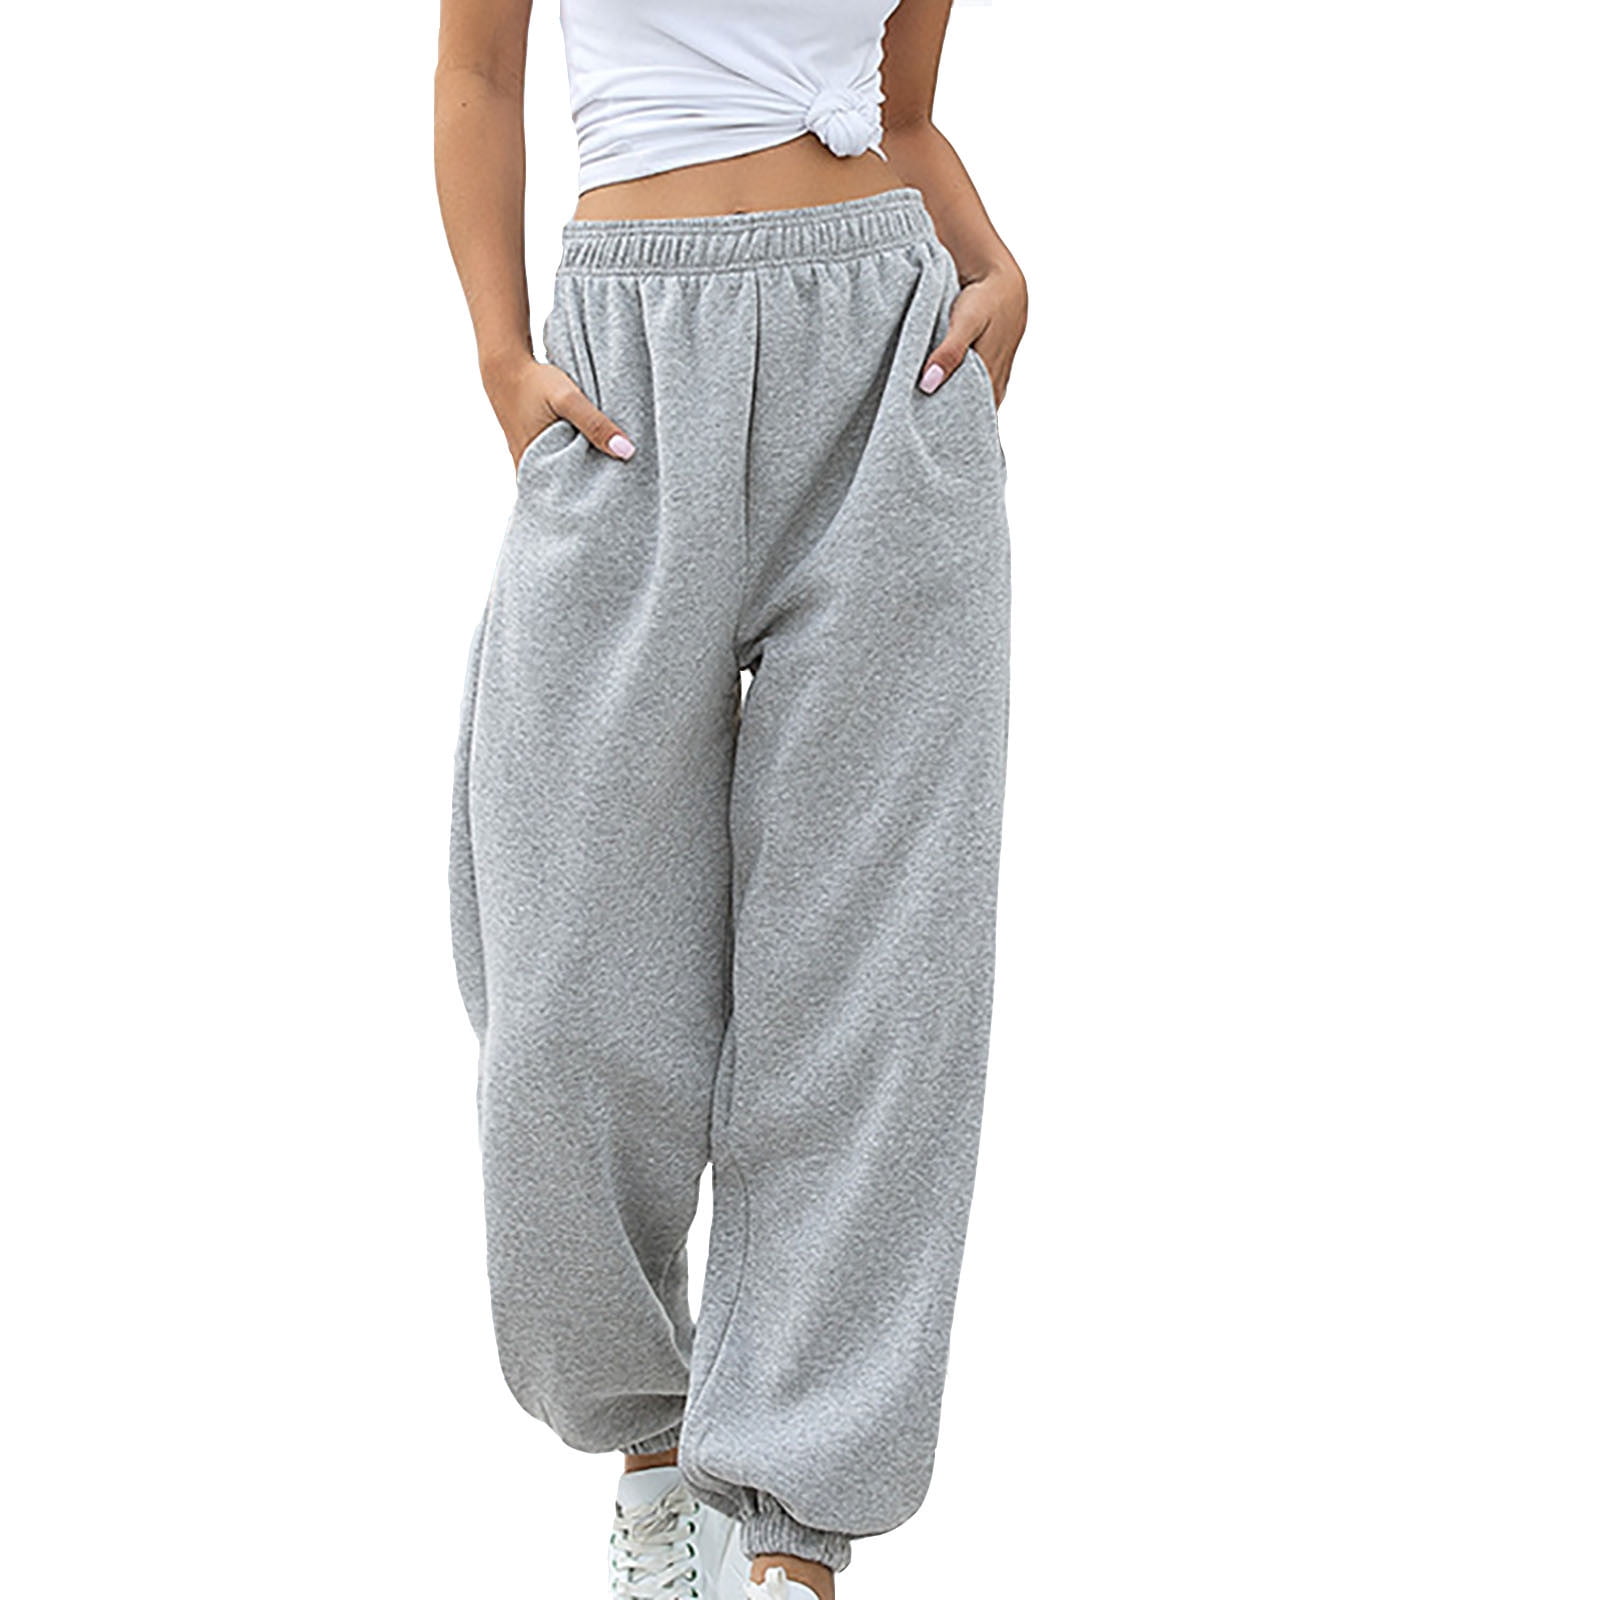 KaLI_store Womens Sweatpants Women High Waisted, Bootcut Flared Yoga Pants  Tummy Control for Casual Work Workout Grey,XL 